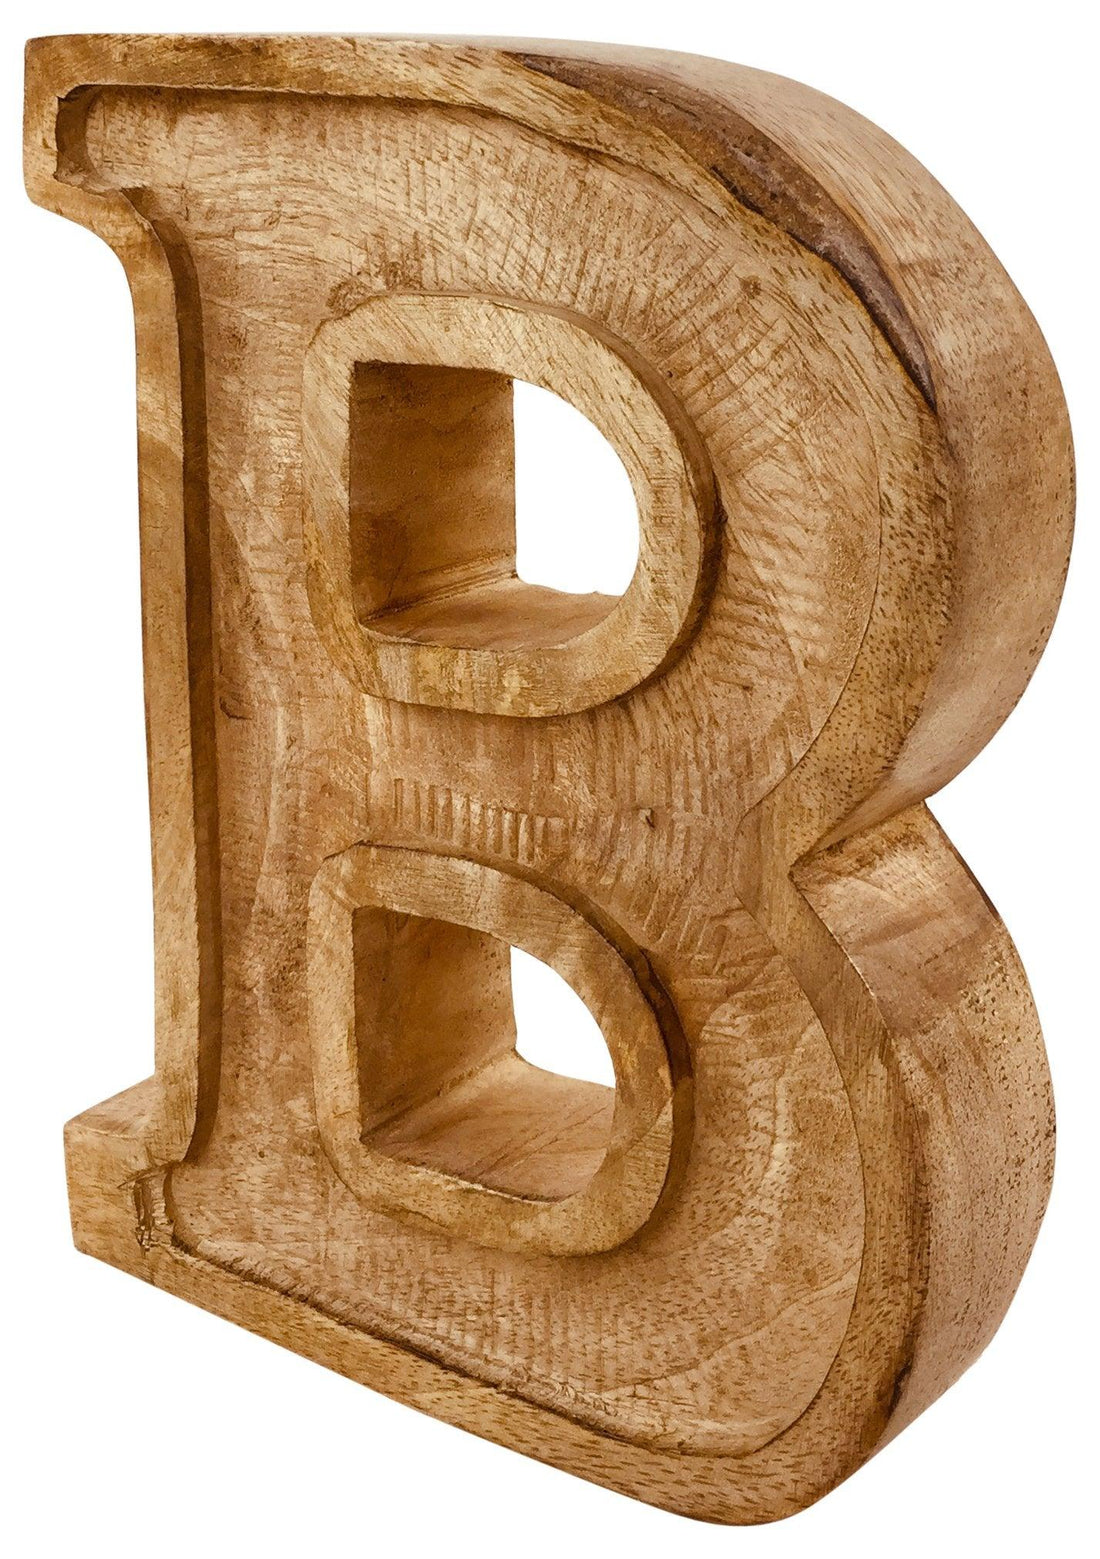 Hand Carved Wooden Embossed Letter B - £18.99 - Single Letters 